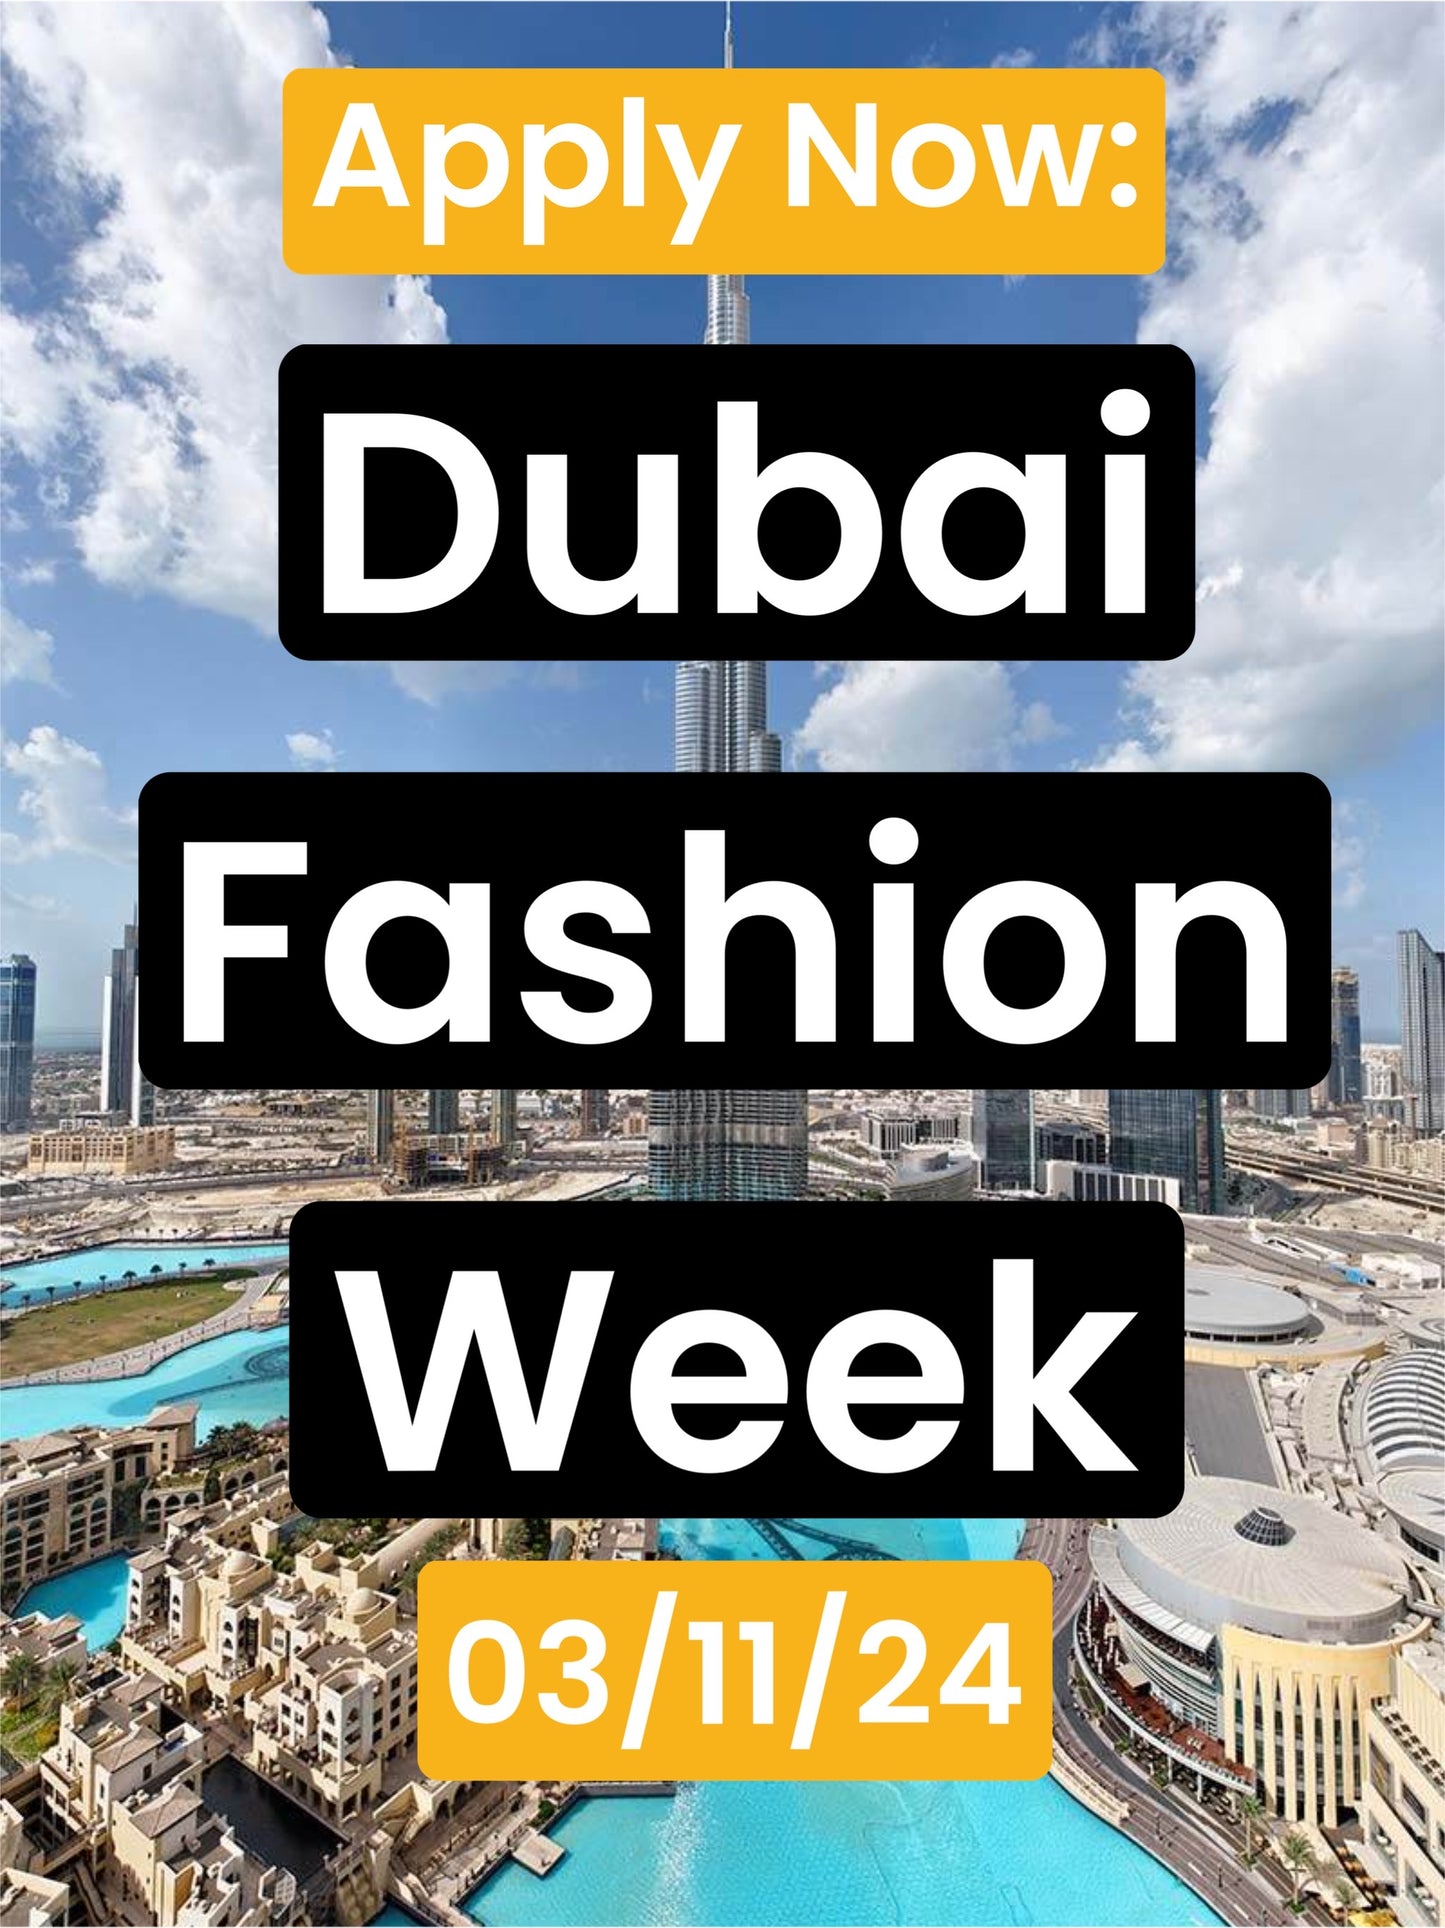 Virtual Viewing Ticket: Dubai Fashion Week 03/11/24 (Link will be sent week of show for viewing)